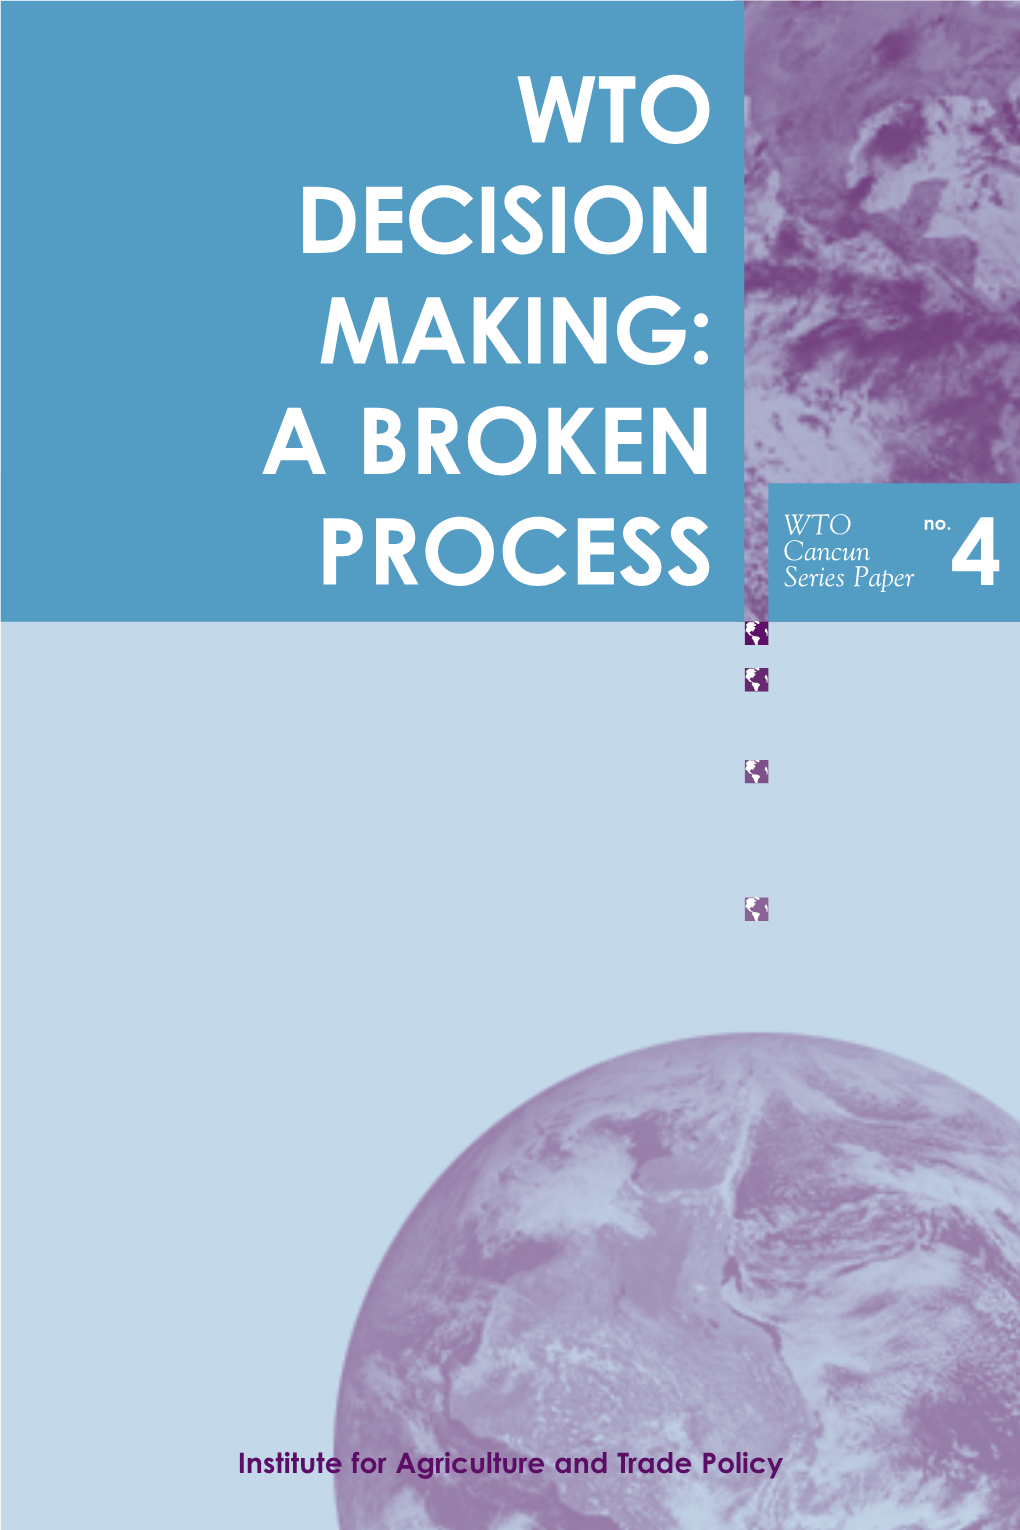 Wto Decision Making: a Broken Process 4